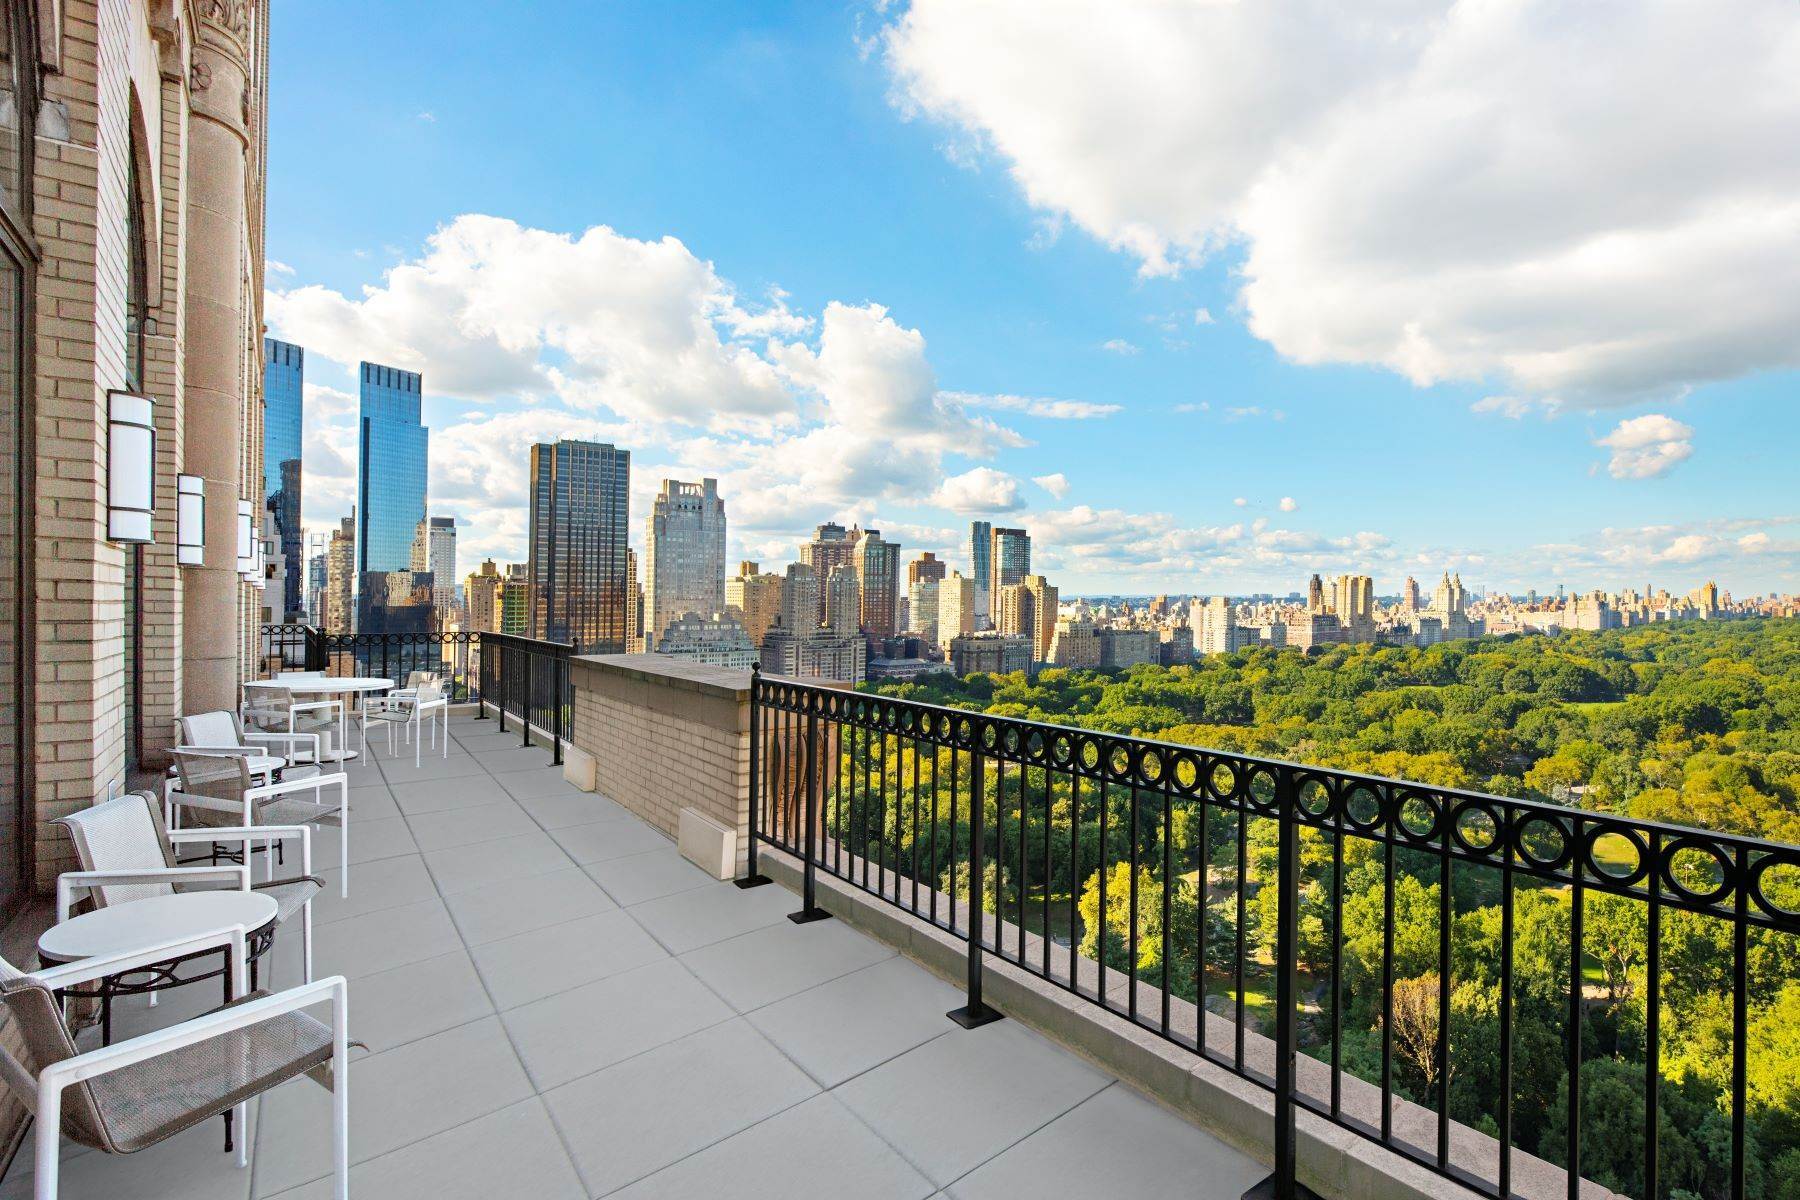 6. Condominiums for Sale at 50 Central Park South, 30/31 Floors 50 Central Park South, 30/31 New York, New York 10019 United States